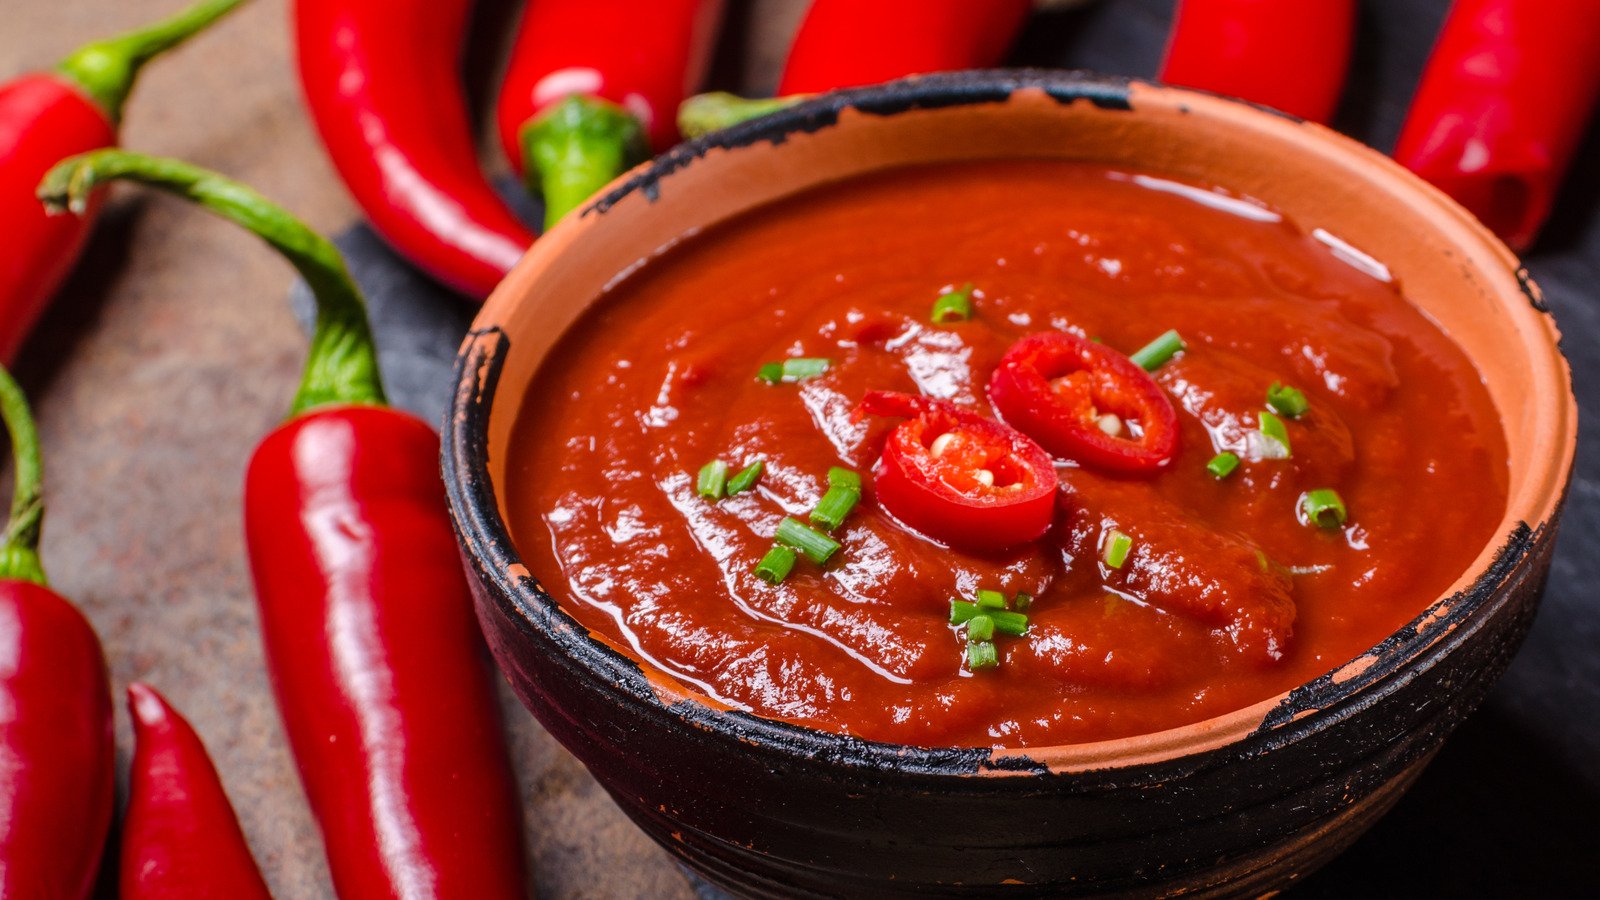 Is Hot Sauce Actually Bad For You?